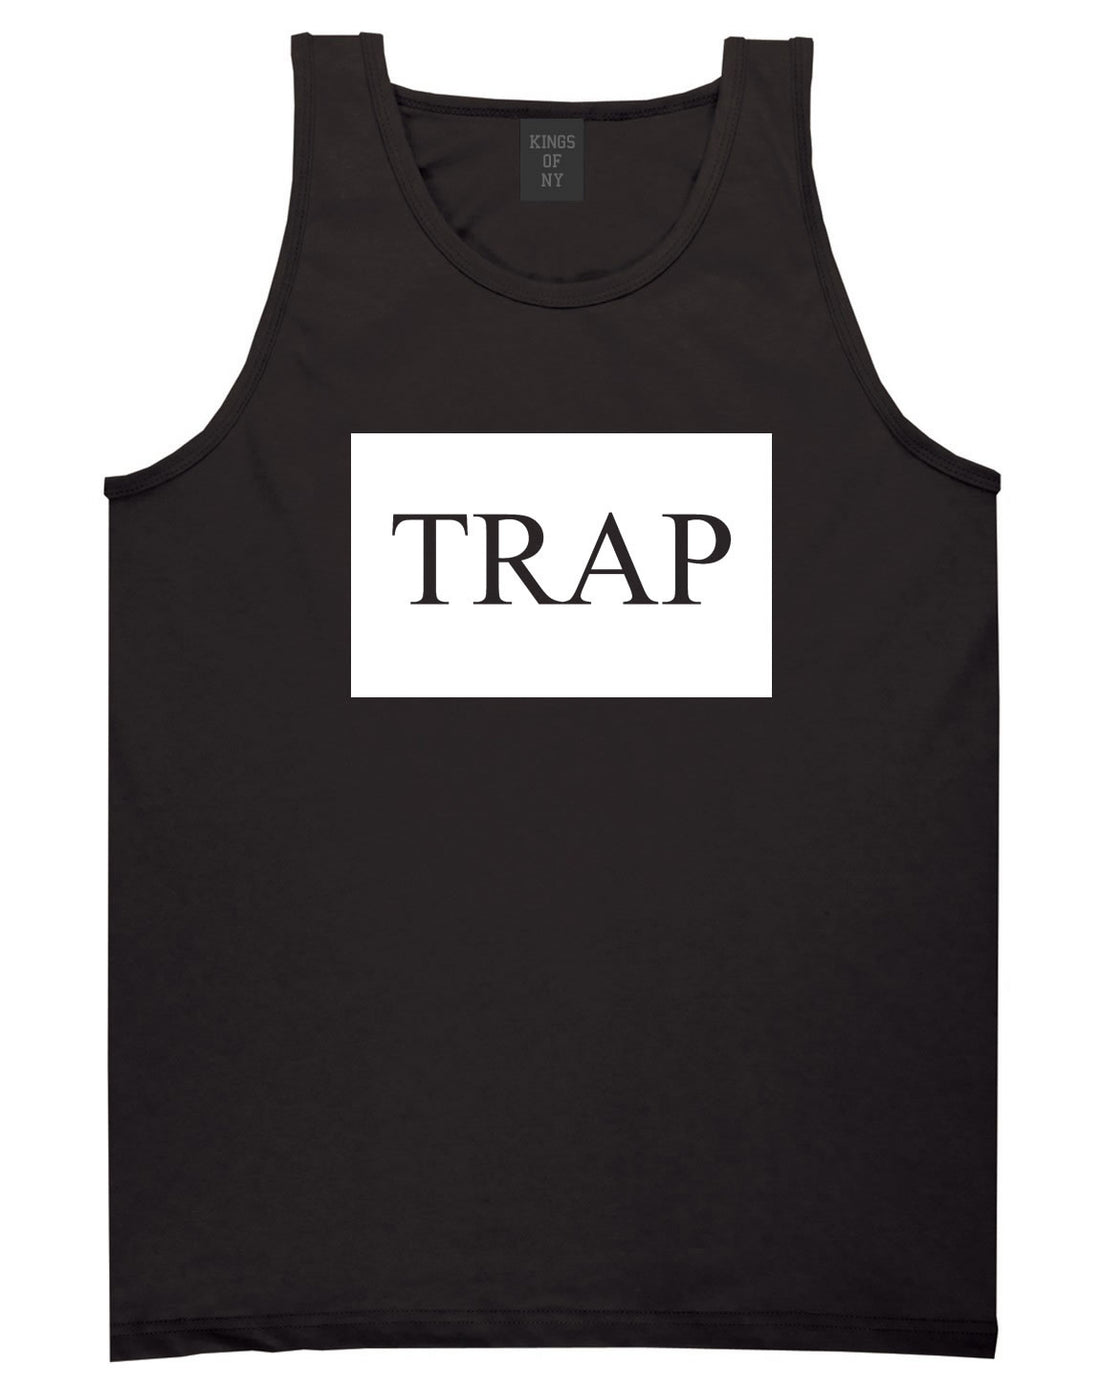 Trap Rectangle Logo Tank Top in Black By Kings Of NY